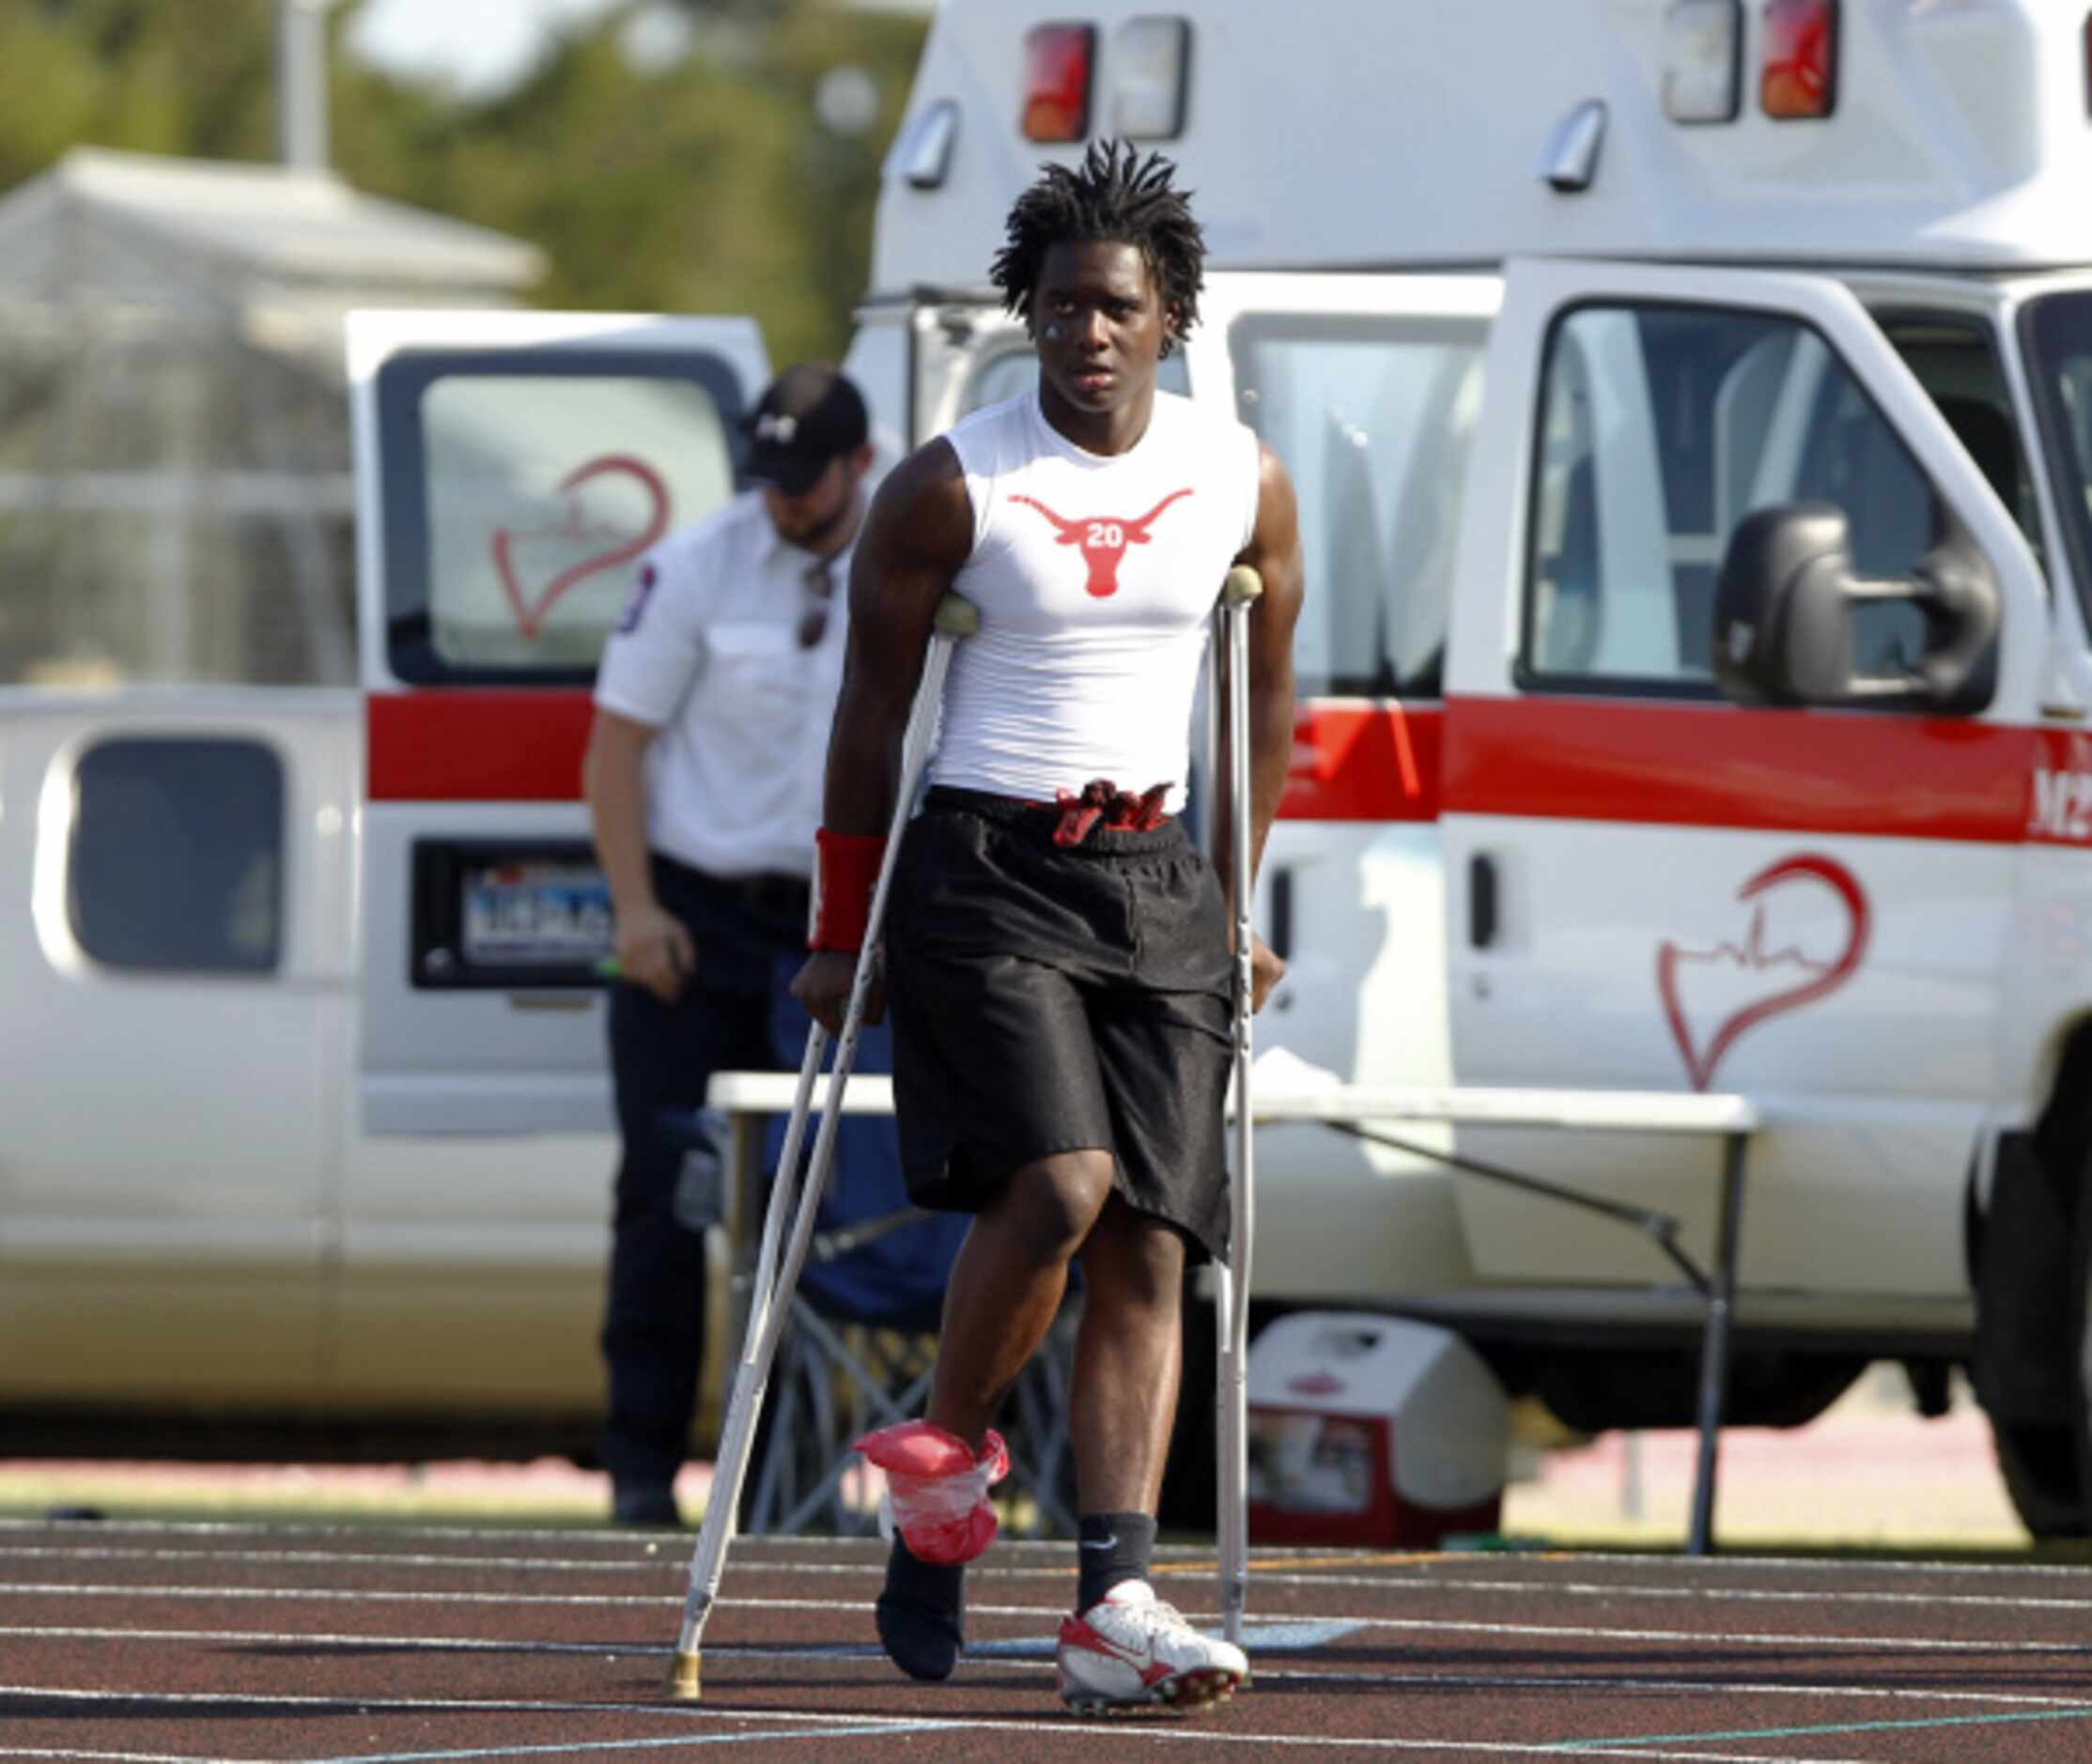 Cedar Hill's Kiedek Berry (20) hobbles on crutches after suffering an ankle injury during...